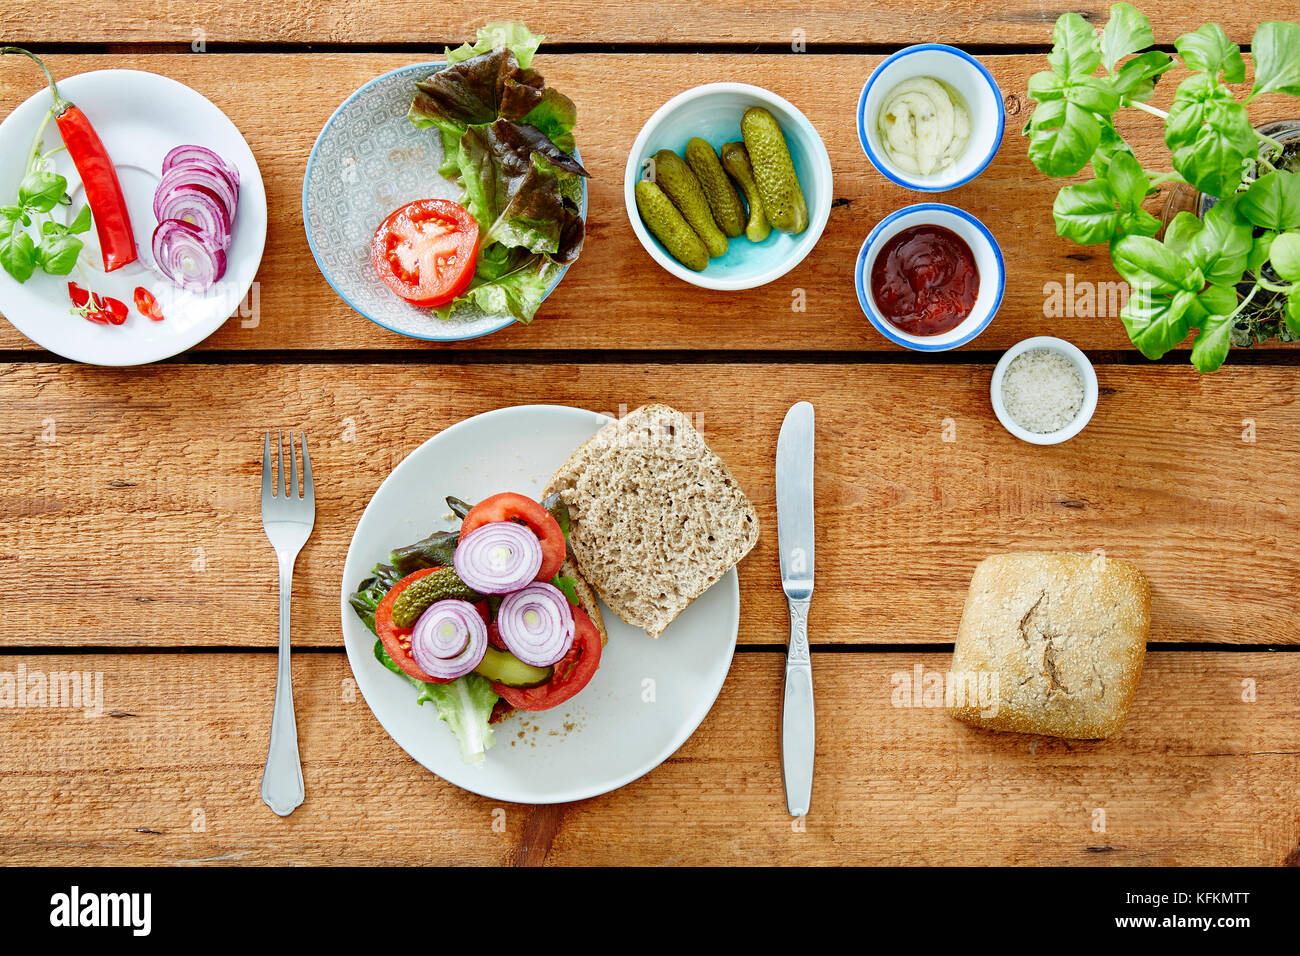 preparing a healthy delicious sandwich foodie lunch Stock Photo